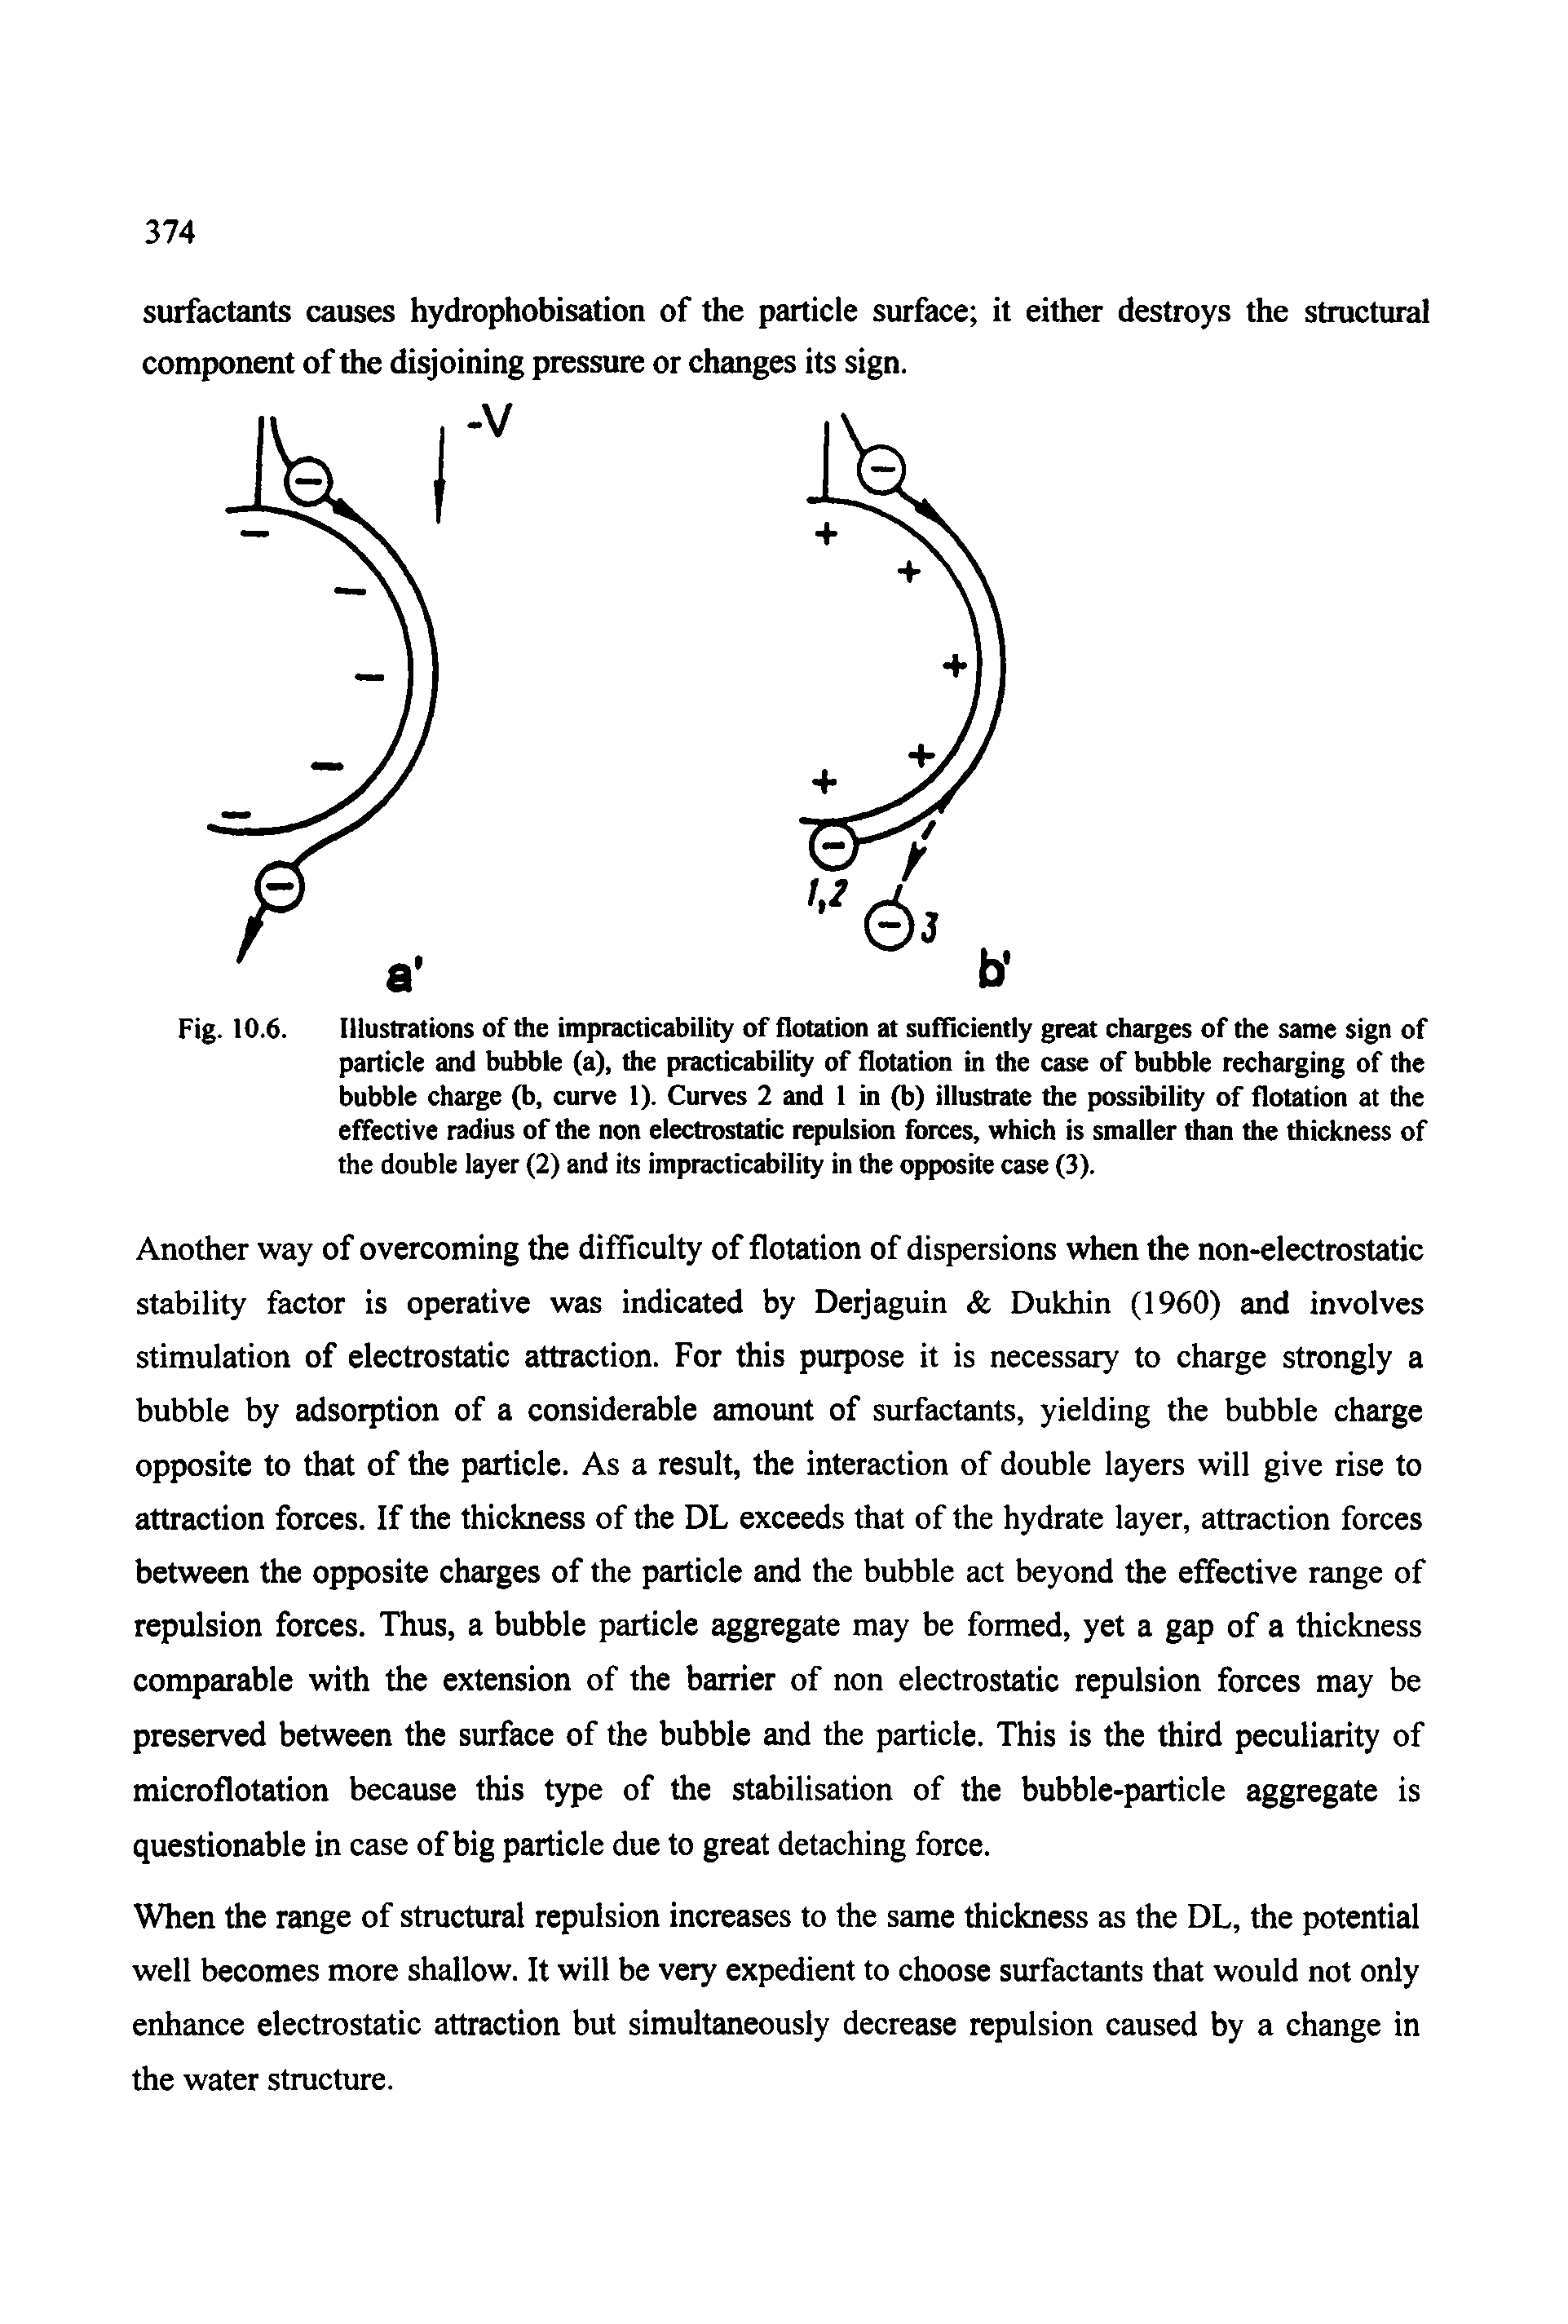 Fig. 10.6. Illustrations of the impracticability of flotation at sufficiently great charges of the same sign of particle and bubble (a), the practicability of flotation in the case of bubble recharging of the bubble charge (b, curve 1). Curves 2 and 1 in (b) illustrate the possibility of flotation at the effective radius of the non electrostatic repulsion forces, which is smaller than the thickness of the double layer (2) and its impracticability in the opposite case (3).